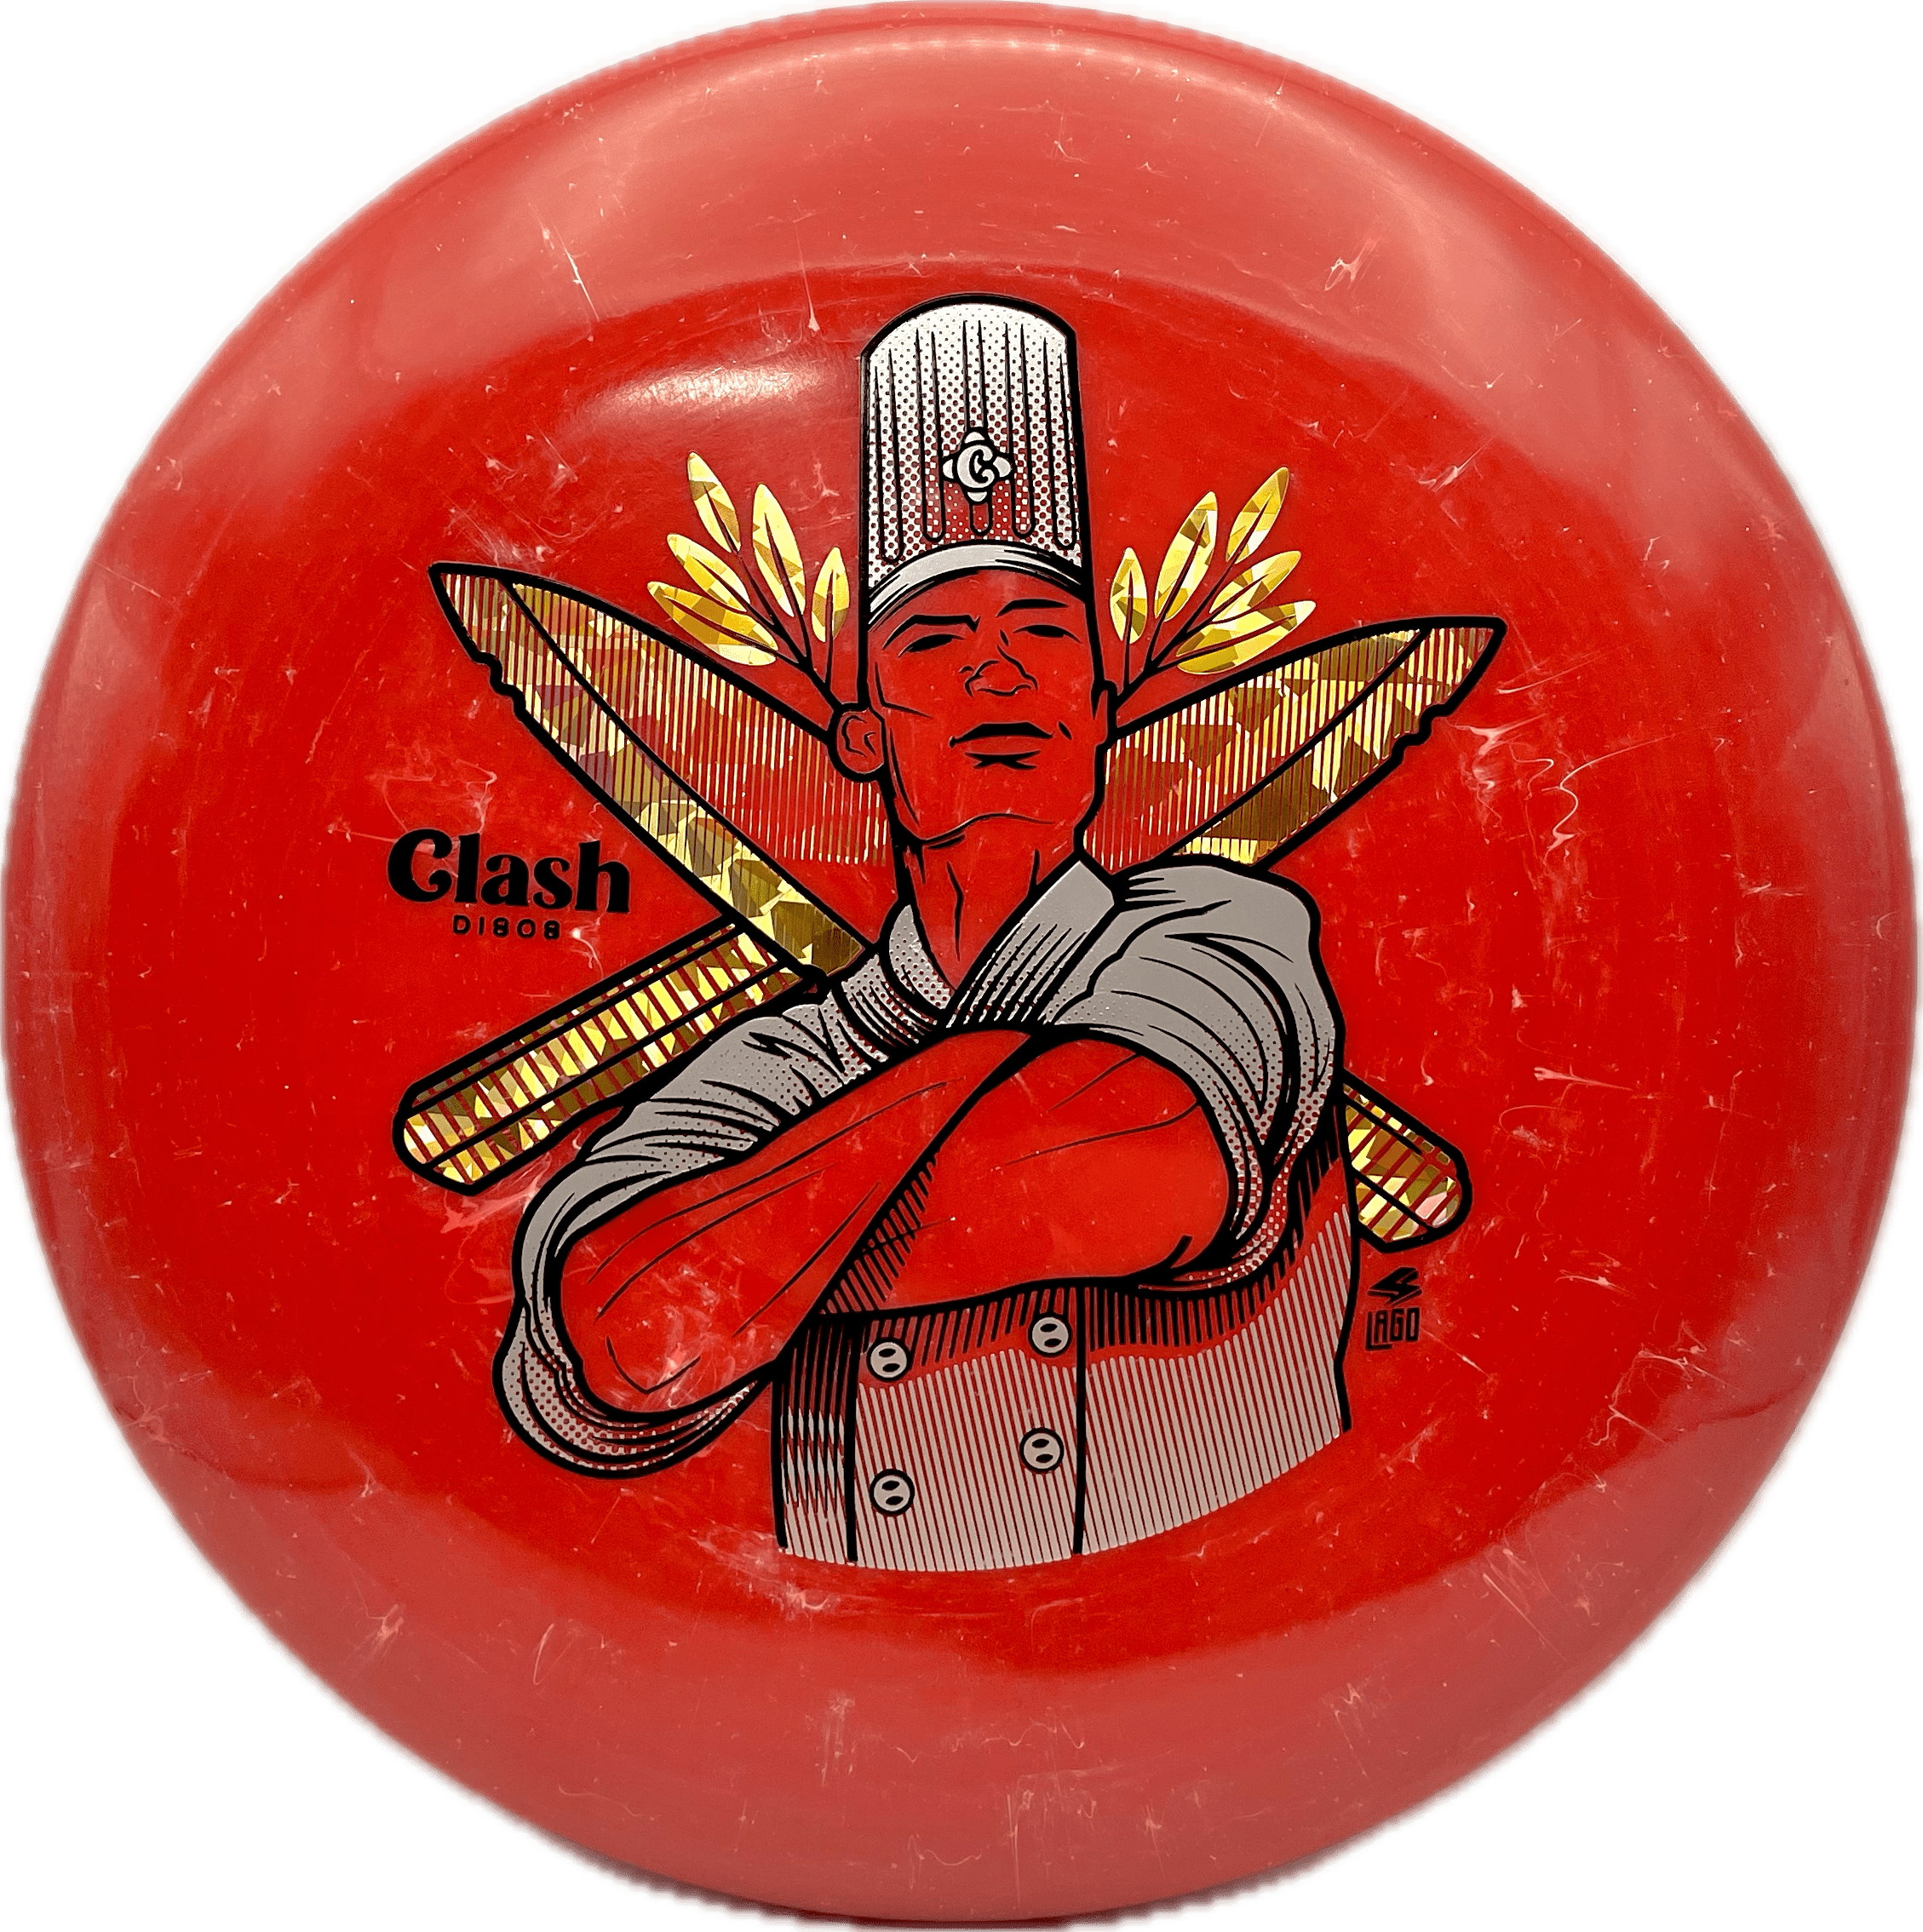 Clash Disc Clash Butter, Steady, 171, Red, Silver Metallic/Gold Shatter